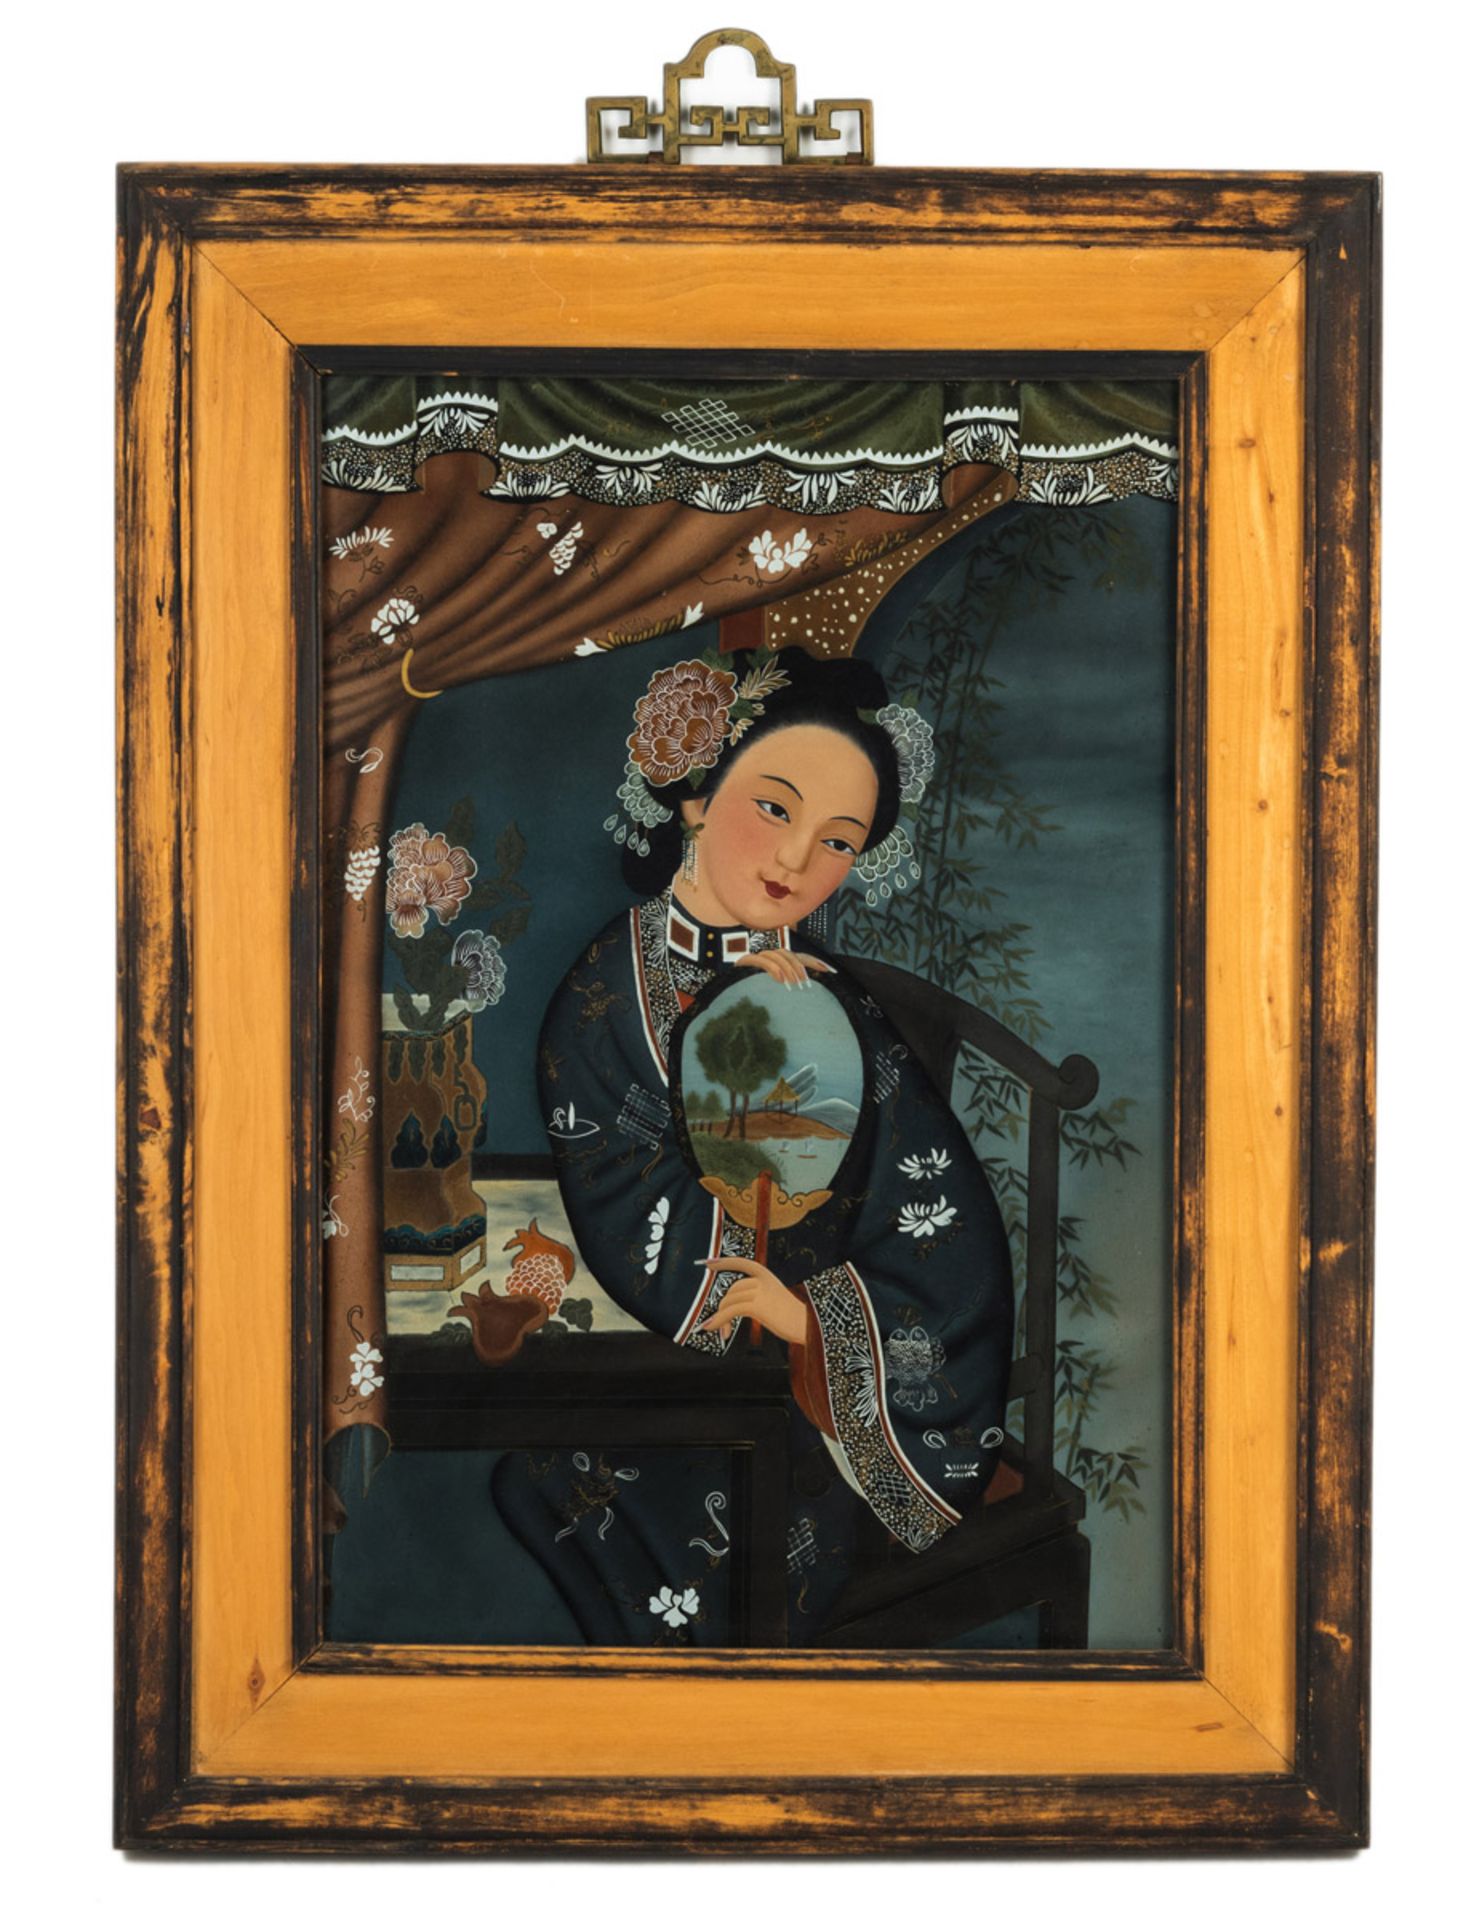 A REVERSE PAINTING ON GLASS OF A LADY HOLDING A FAN